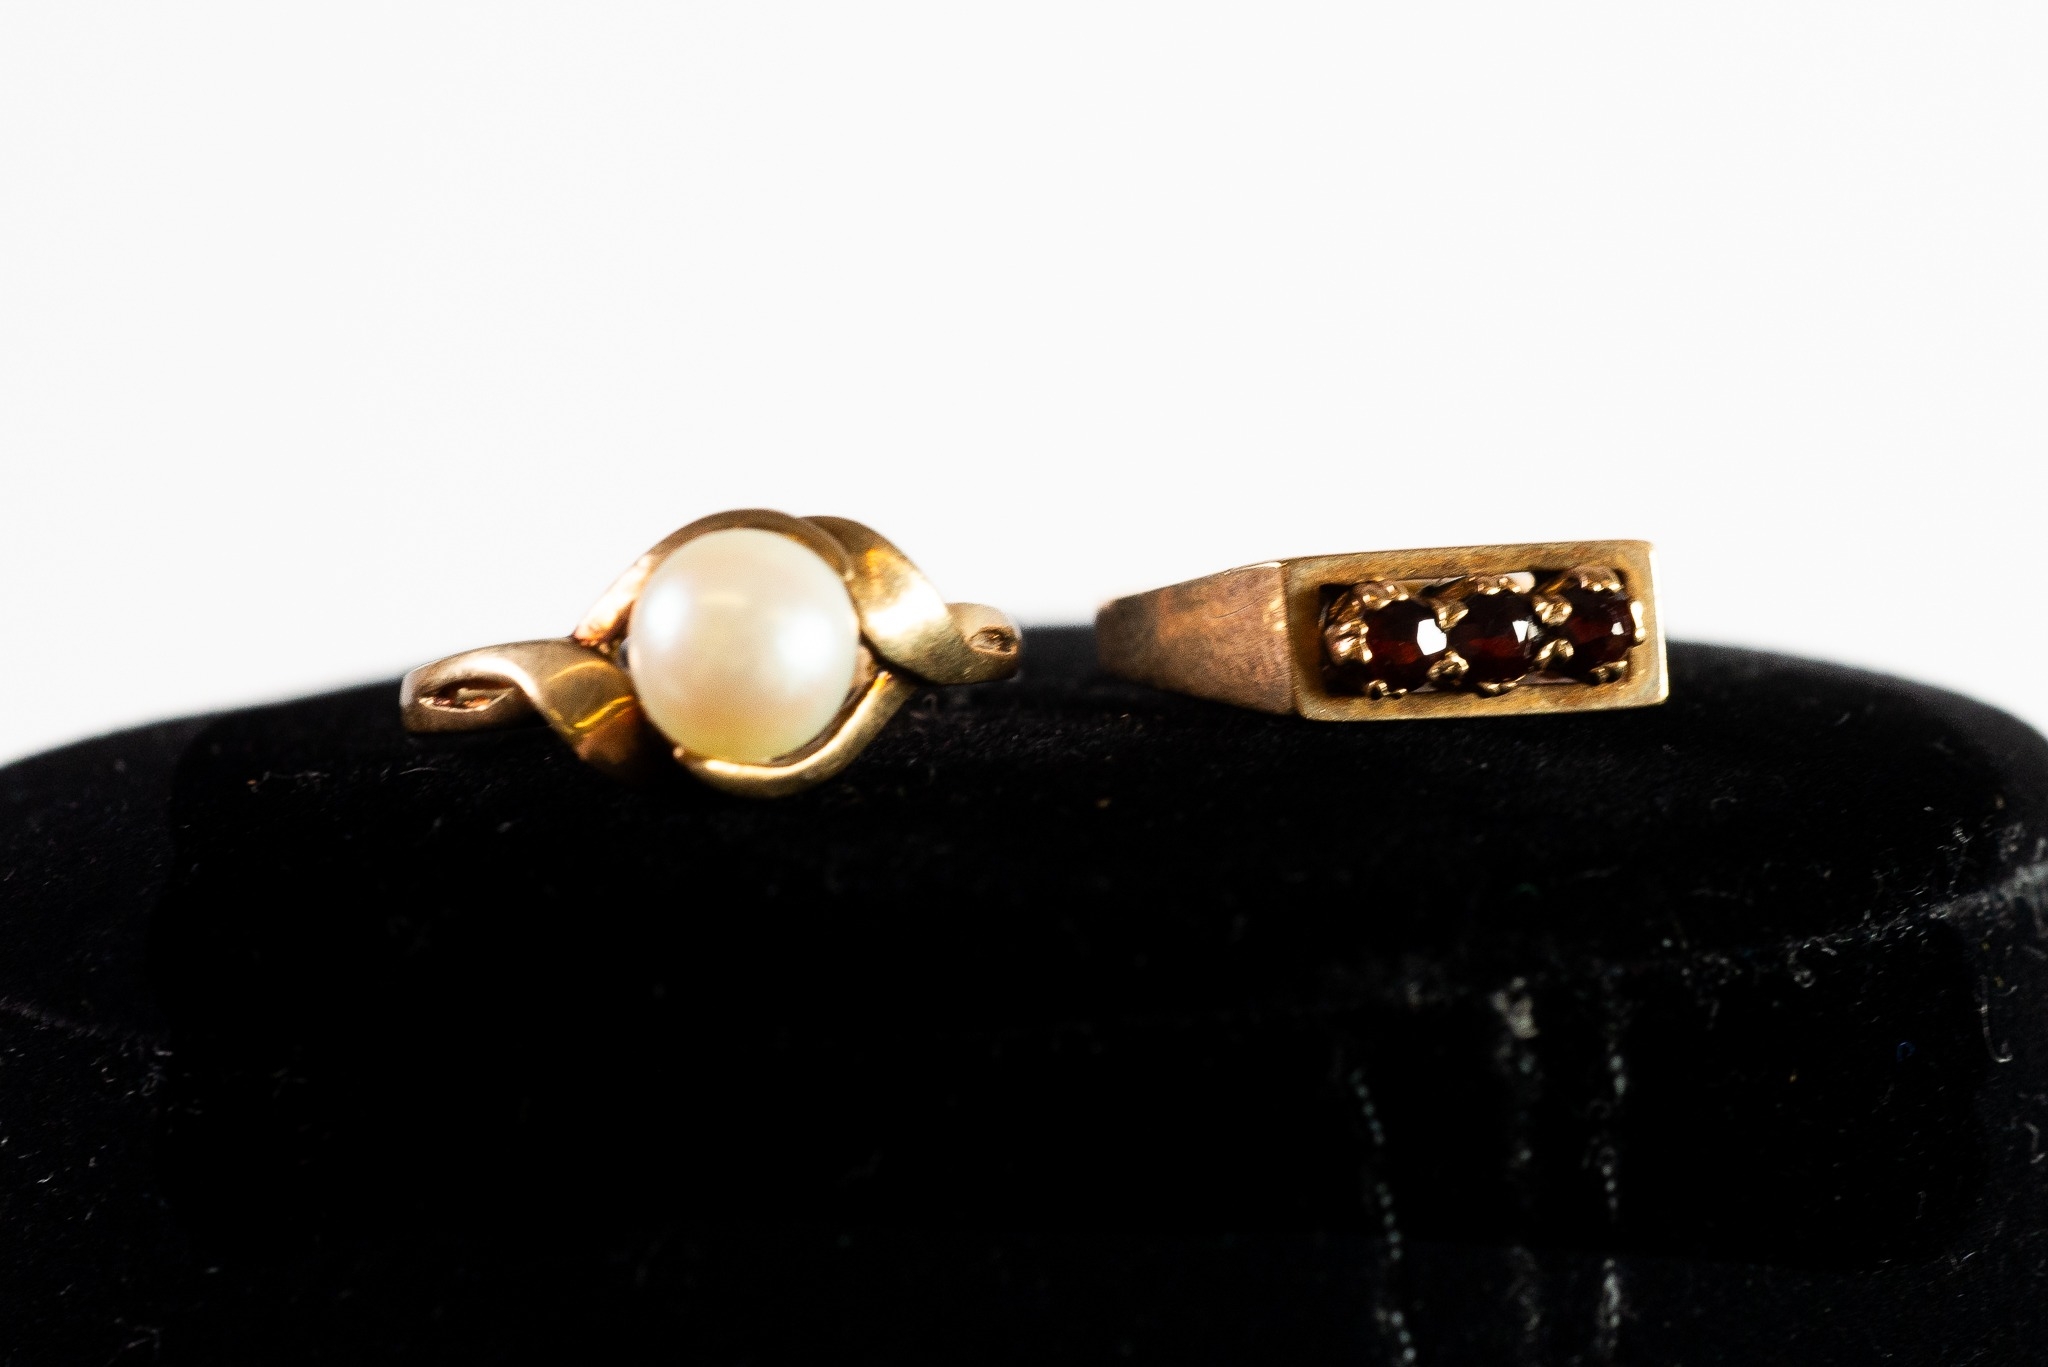 9ct GOLD CROSS-OVER RING, set with a single cultured pearl, ring size L/M and 9ct GOLD RING, the